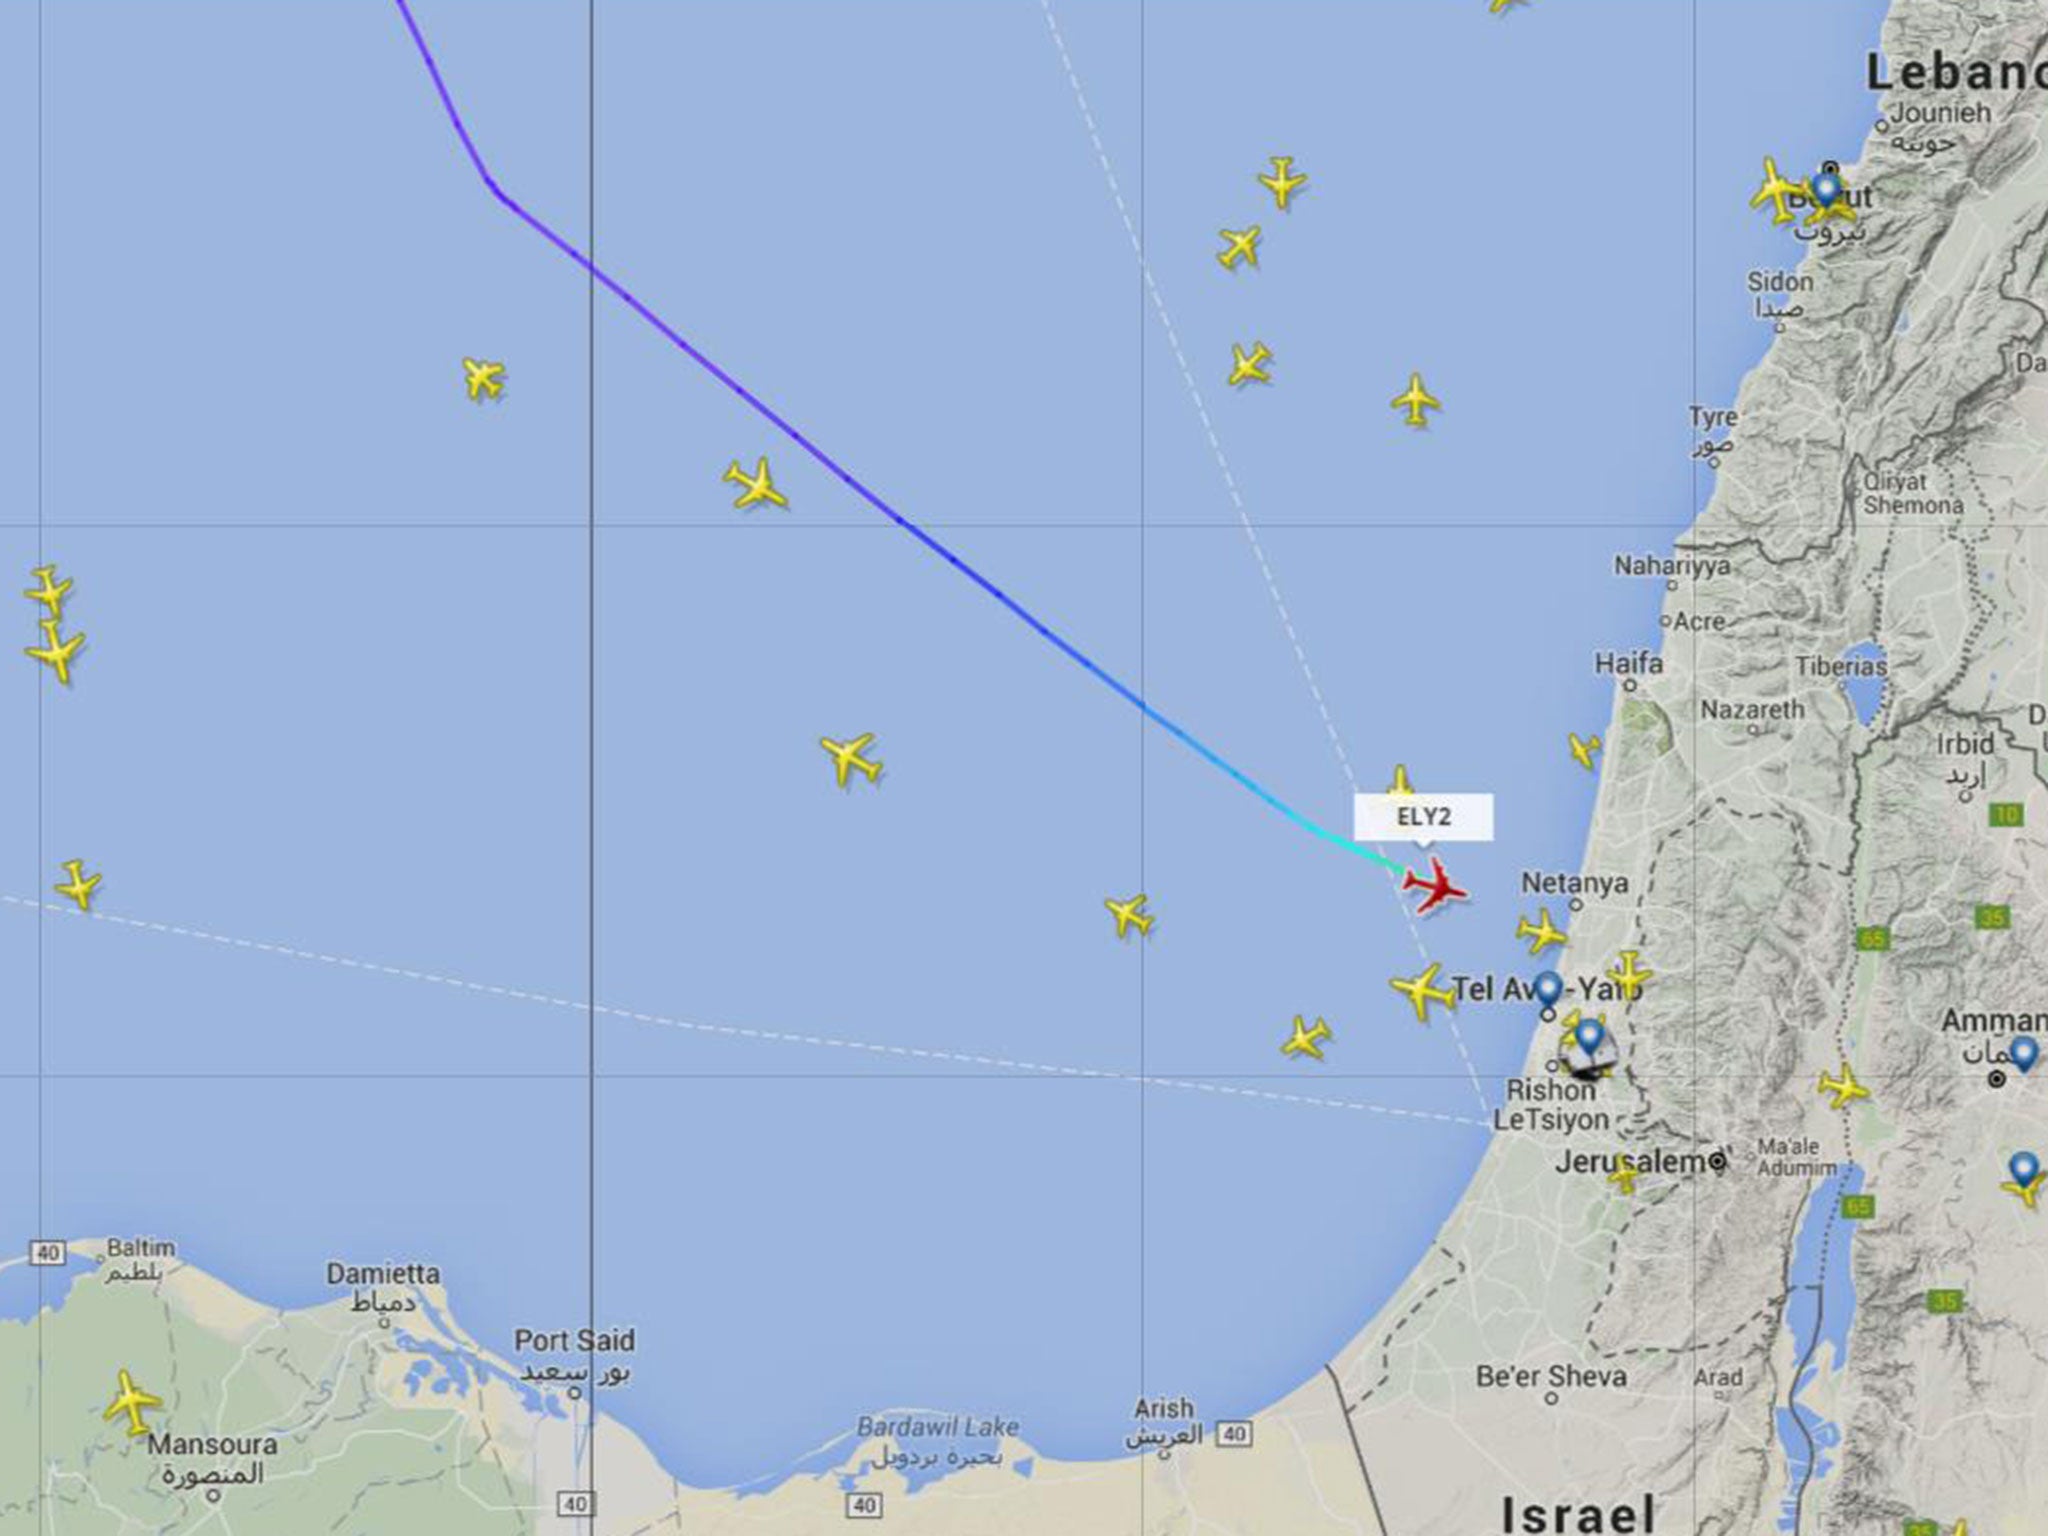 The El Al plane continued to Ben Gurion Airport in Tel Aviv after the alert.